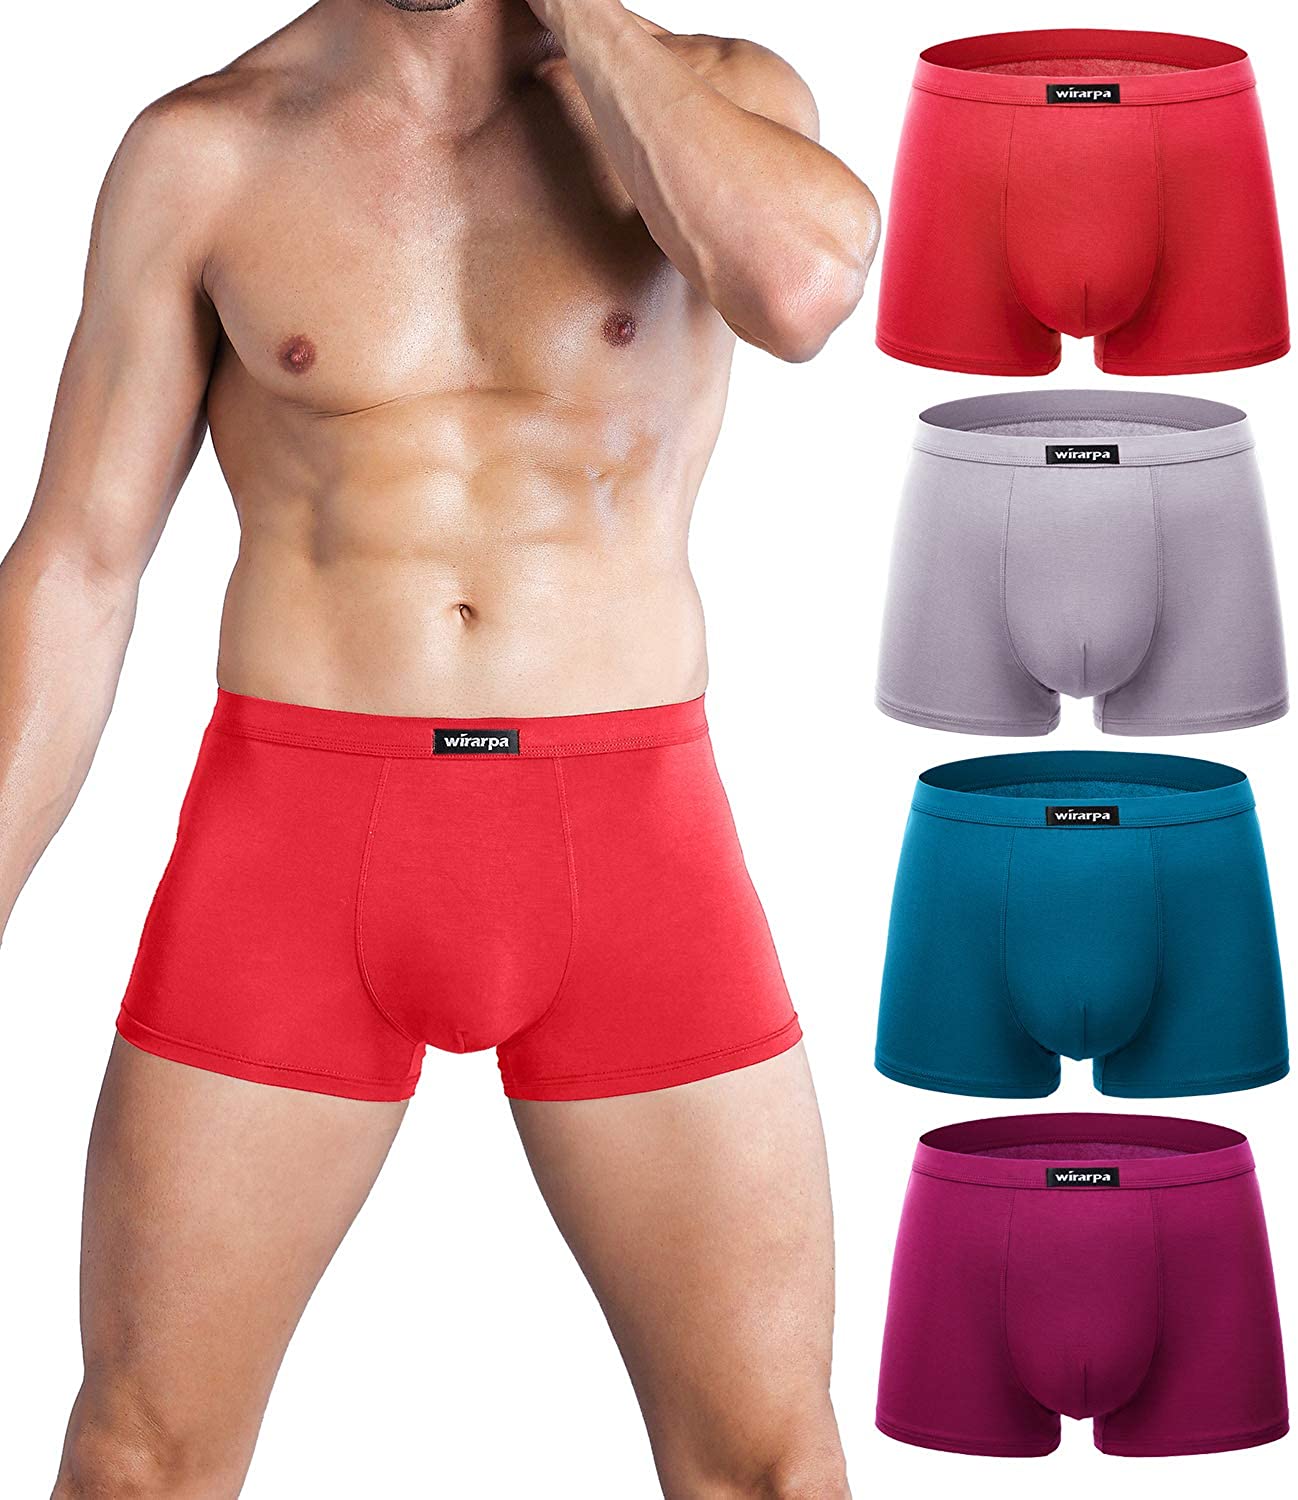 wirarpa Men's Breathable Modal Microfiber Trunks Underwear Covered Band  Multipack